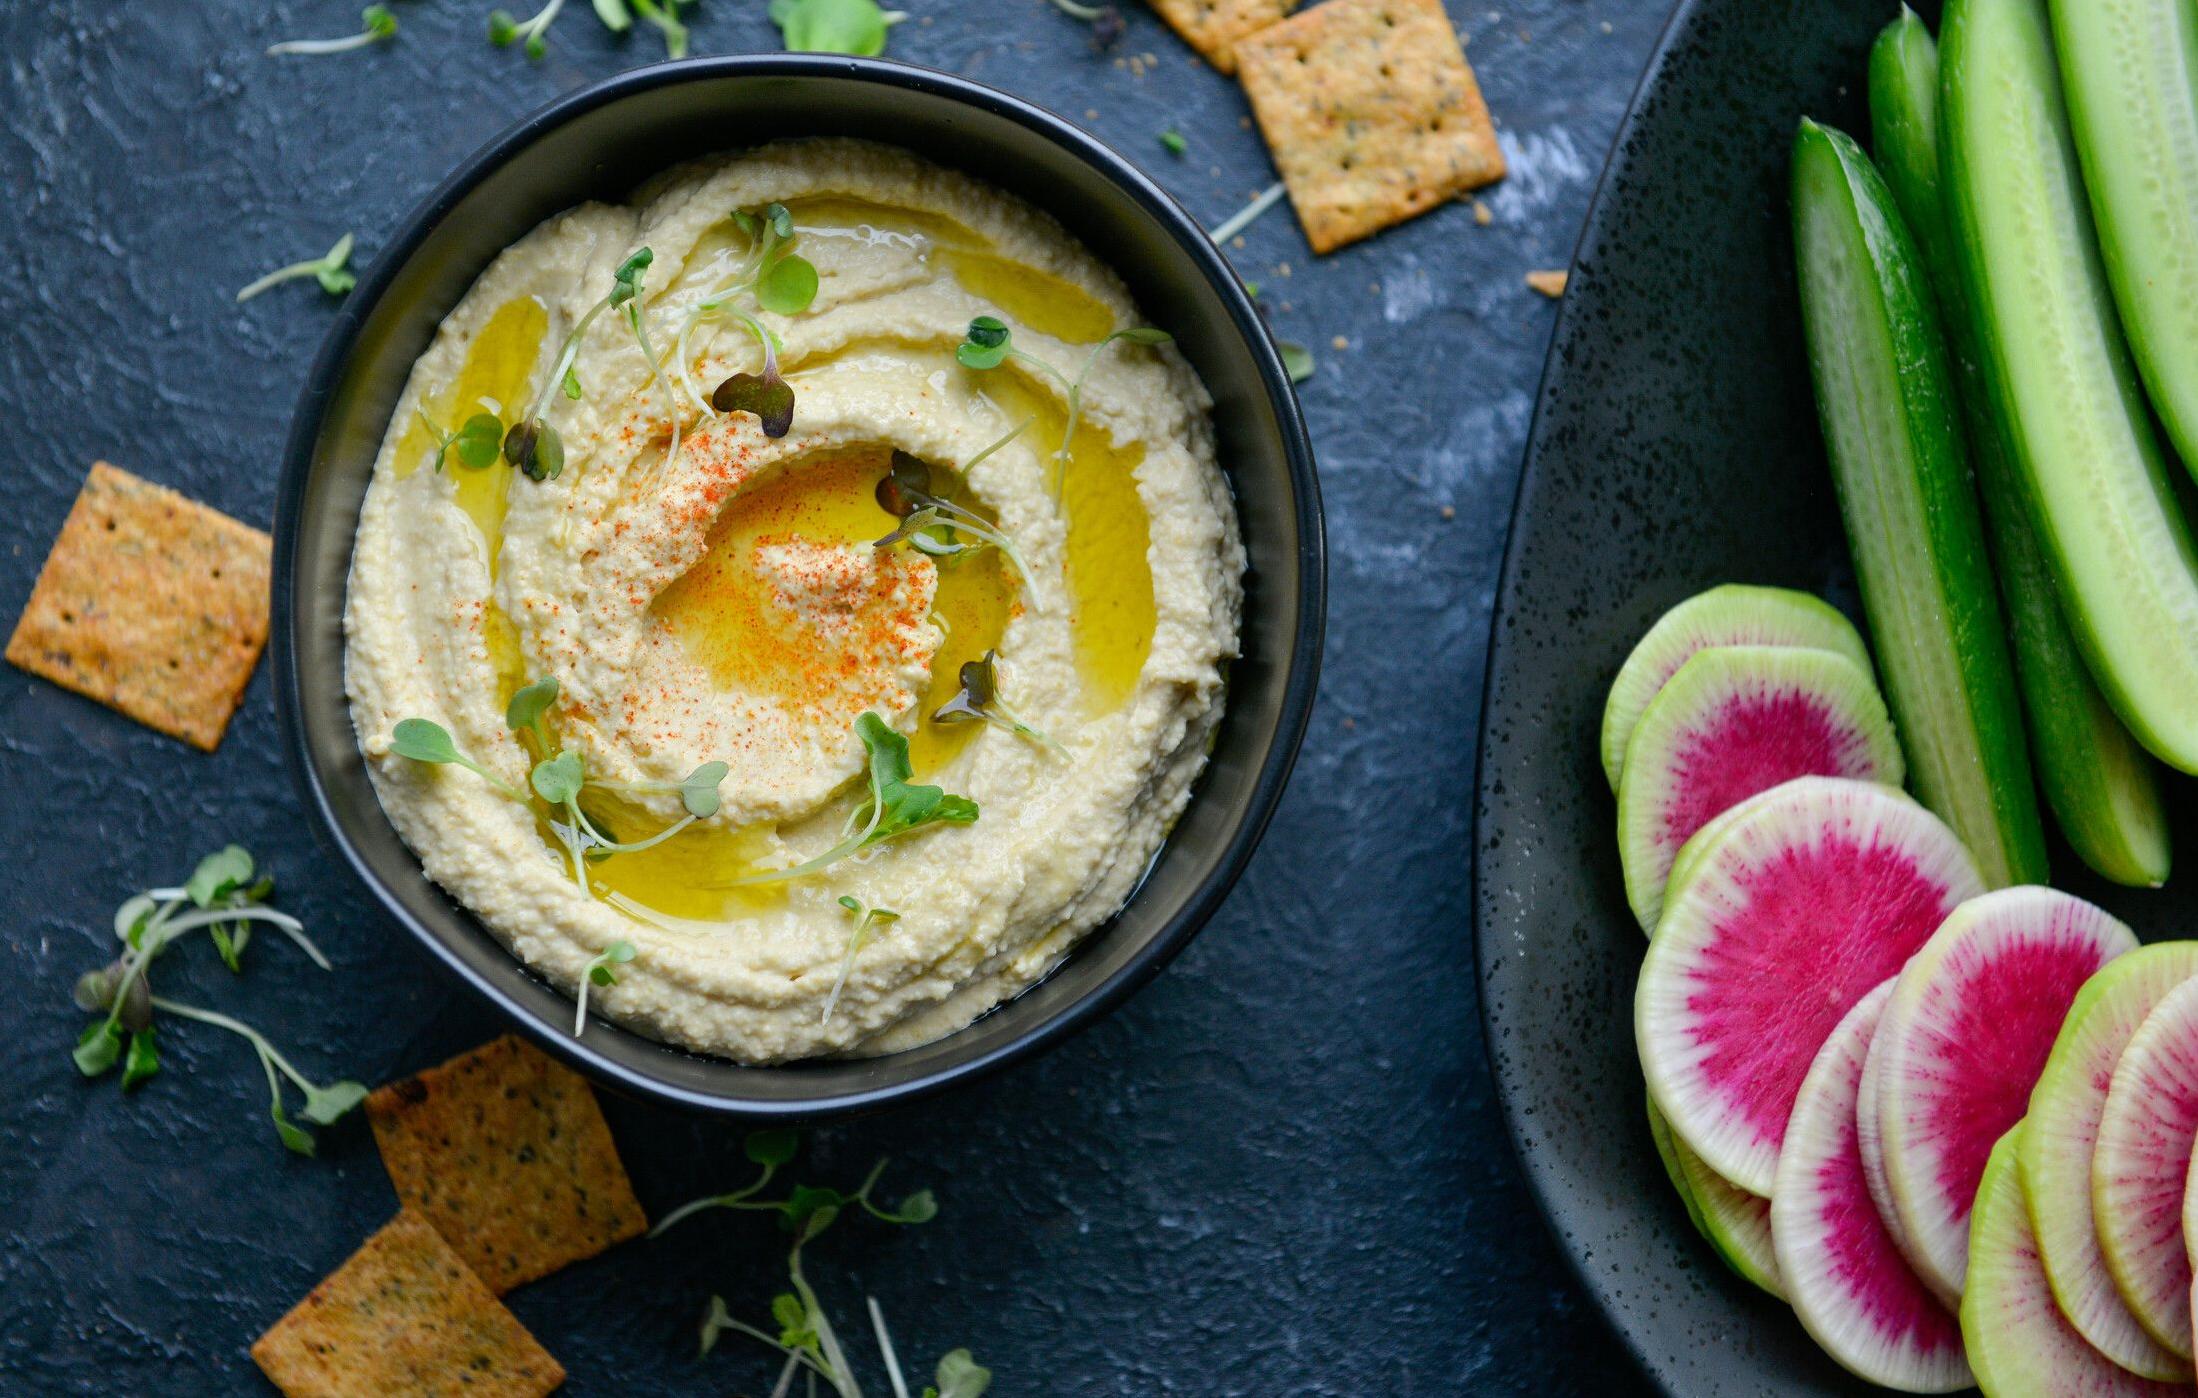  A hummus that is allergy-friendly and packed with amazing flavors to surprise you.